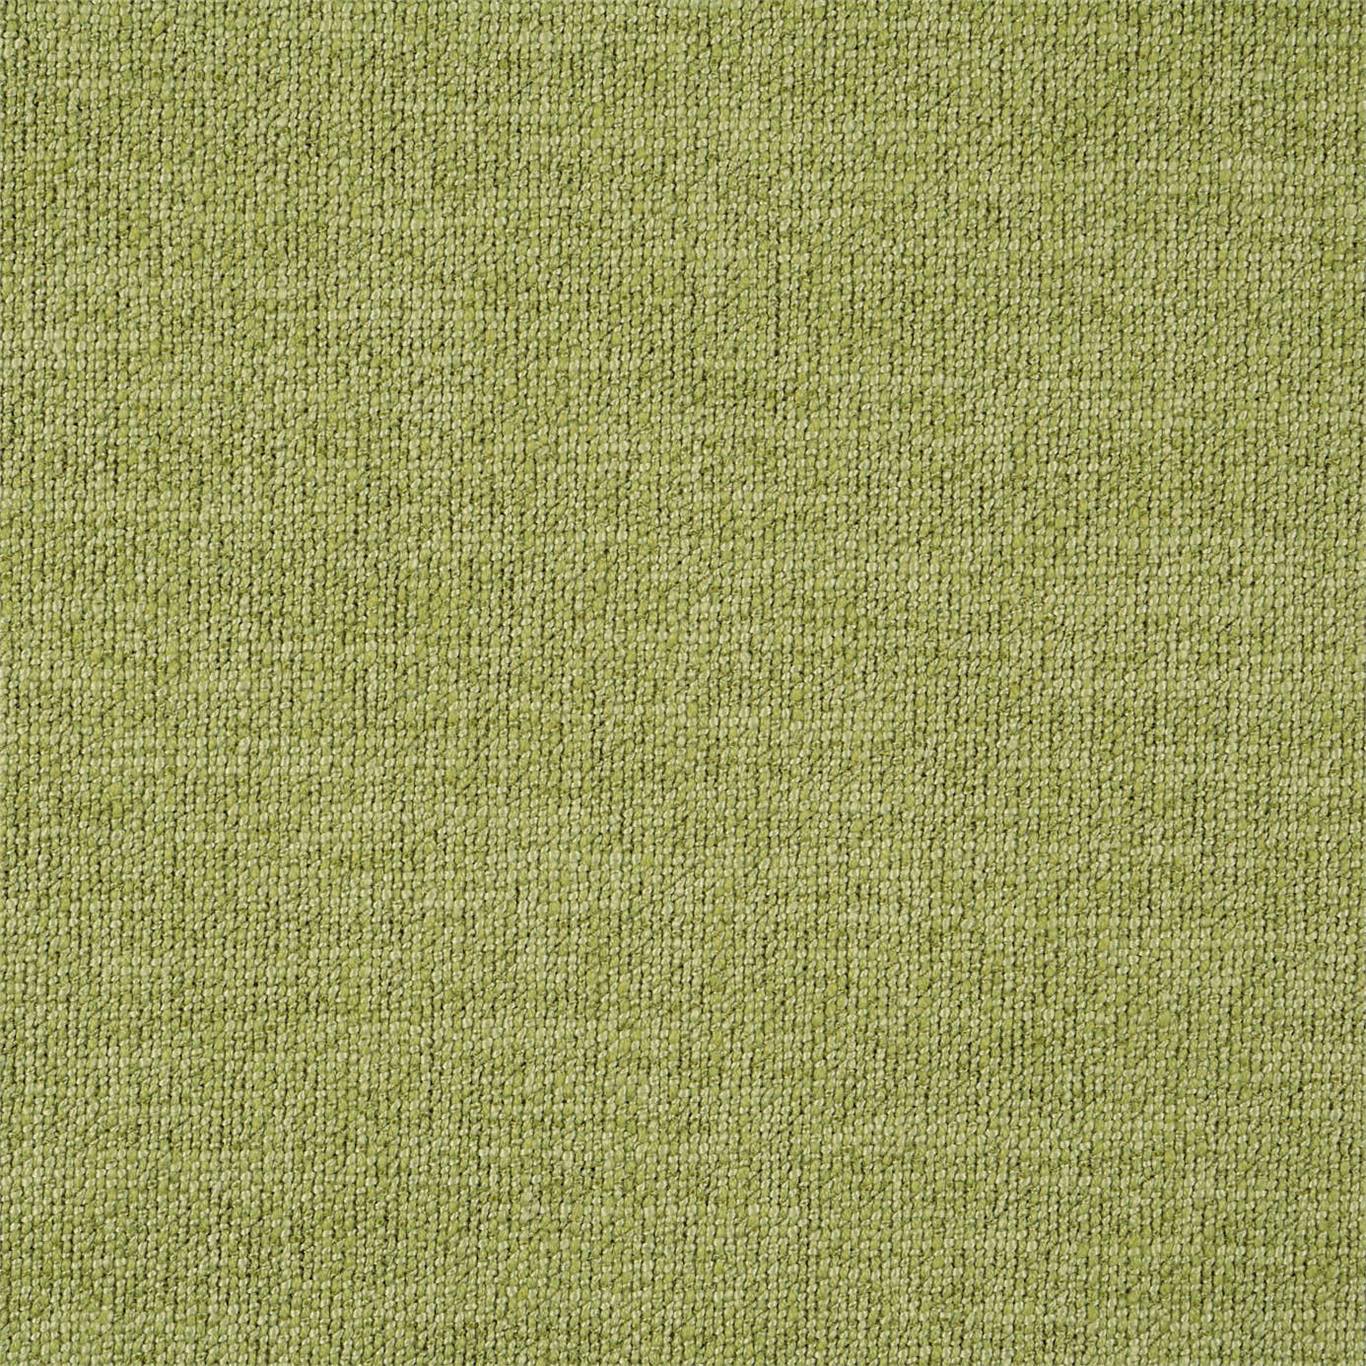 Subject Teatree Fabric by HAR